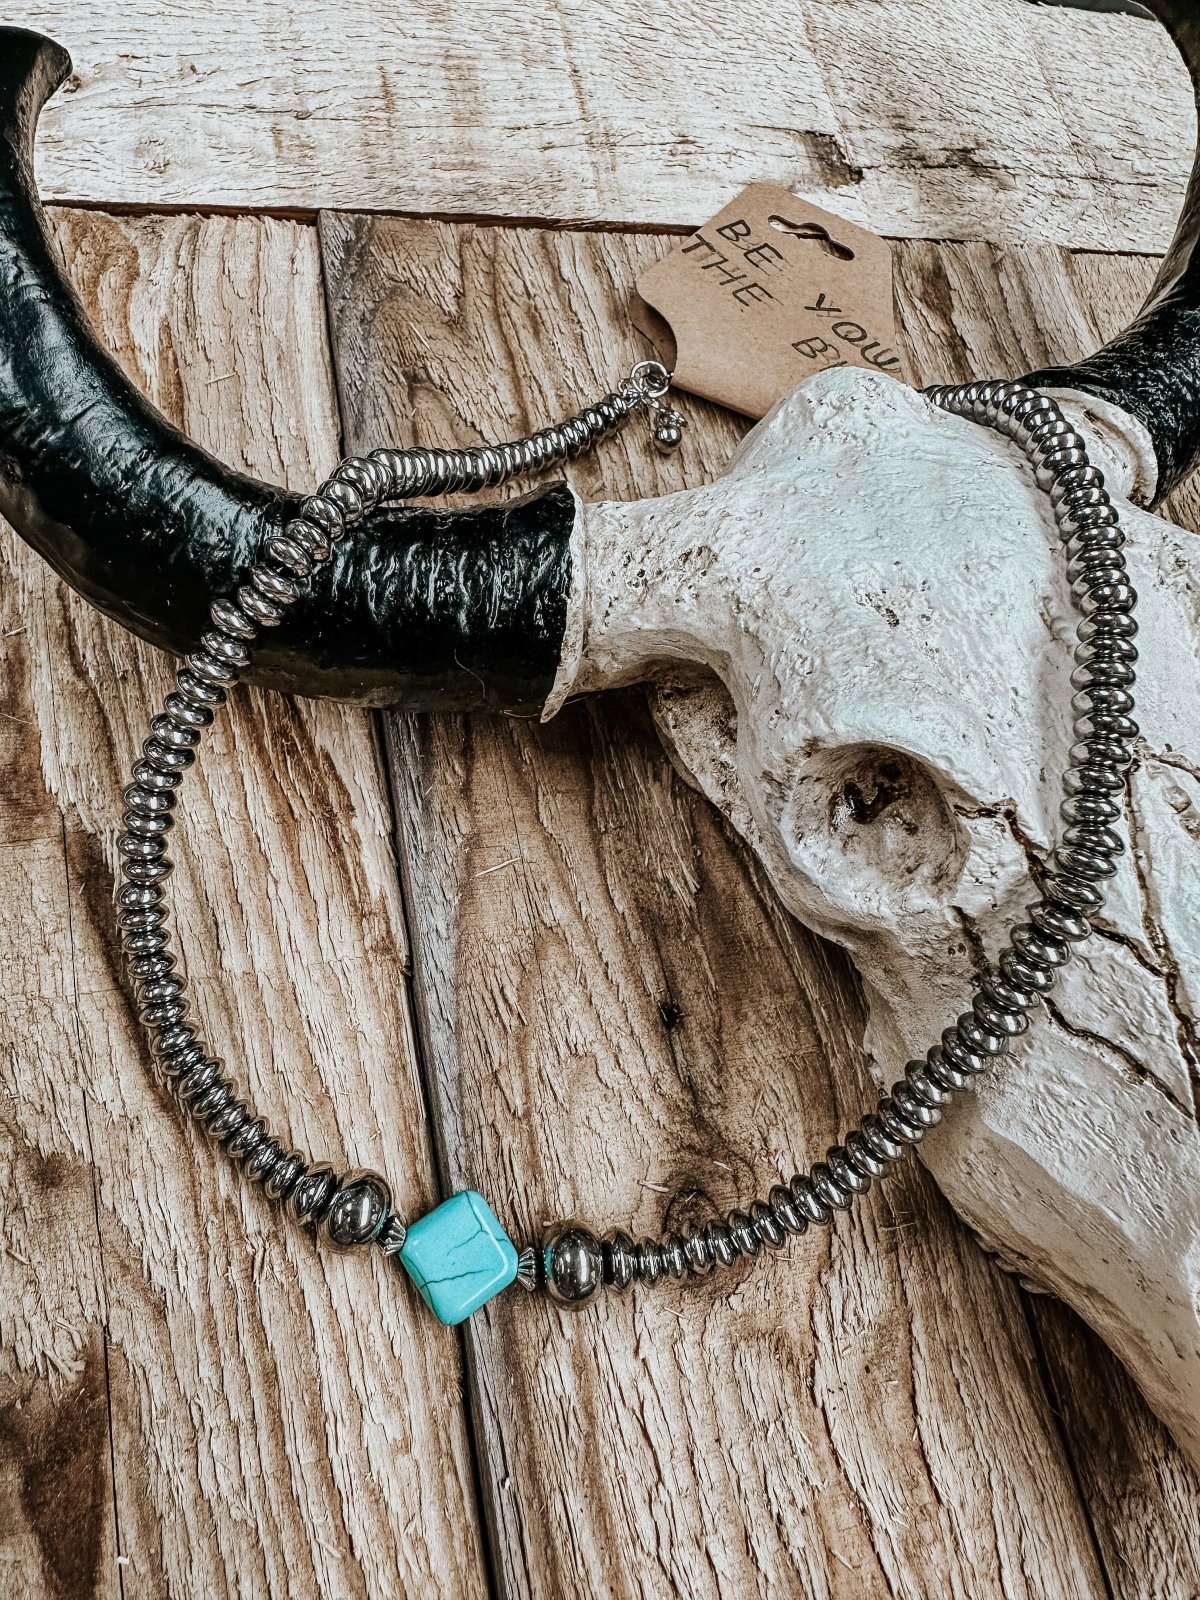 Men's & Women's Native American Turquoise Necklaces and Squash Blossoms -  Native American Jewelry